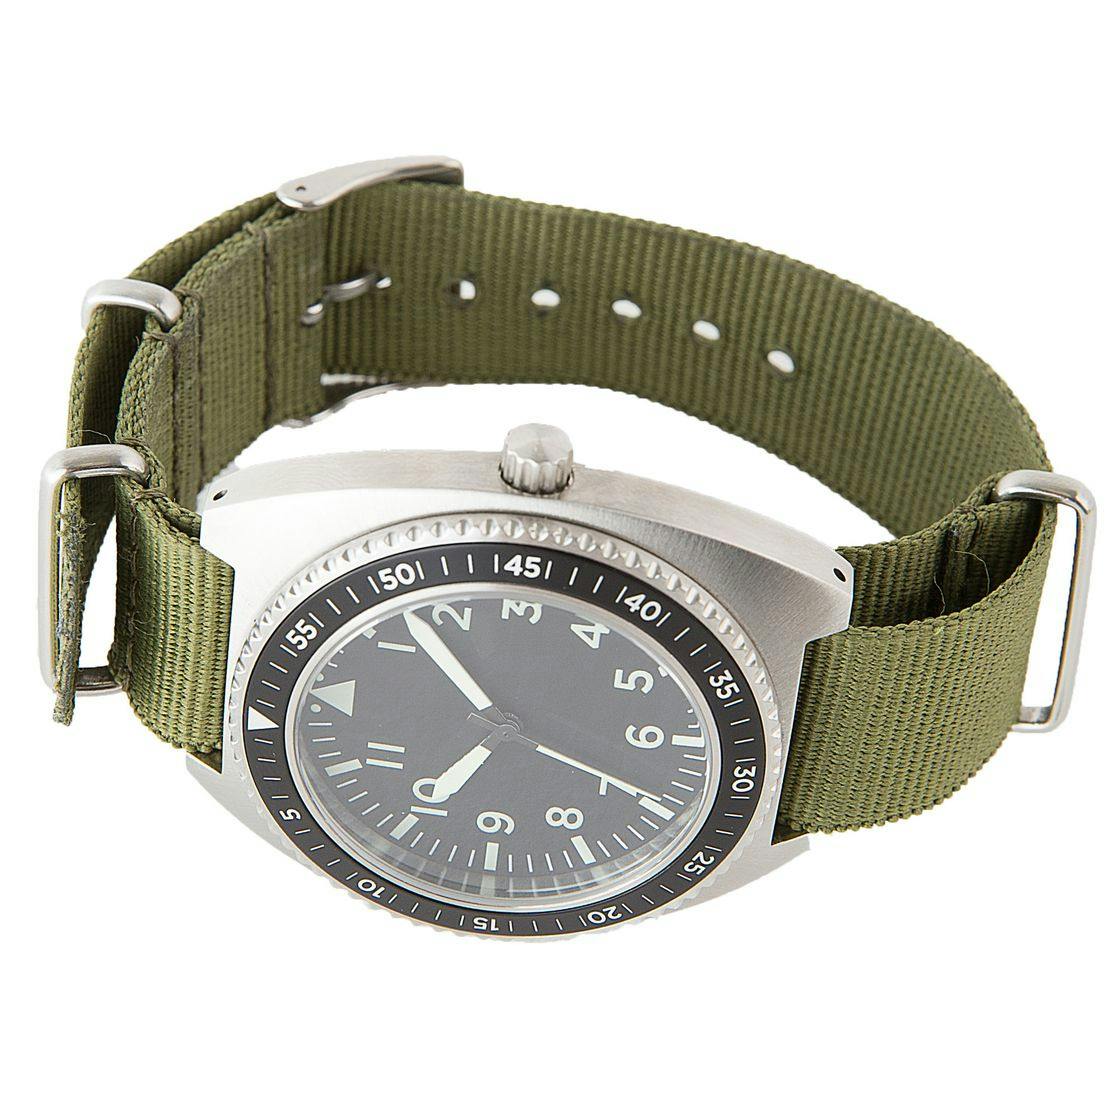 Standard Issue Instruments Pilot Mission Timer + Silicone Strap